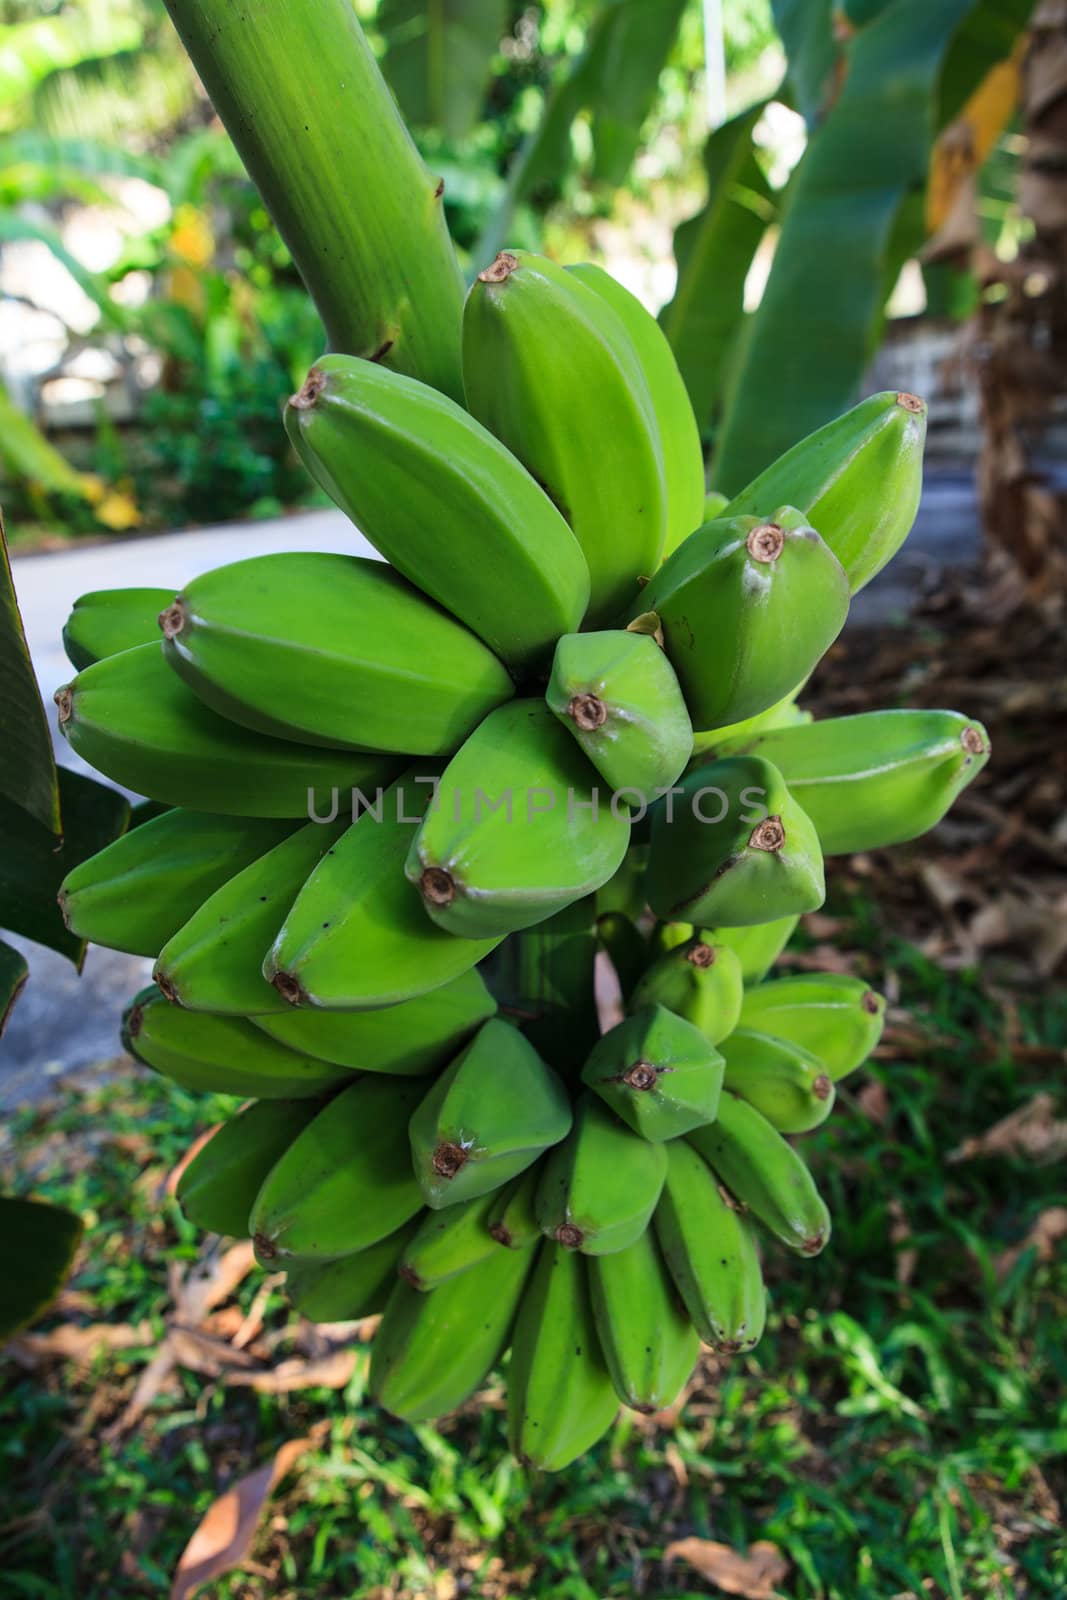 Bunch of ripening bananas on tree  by thanomphong